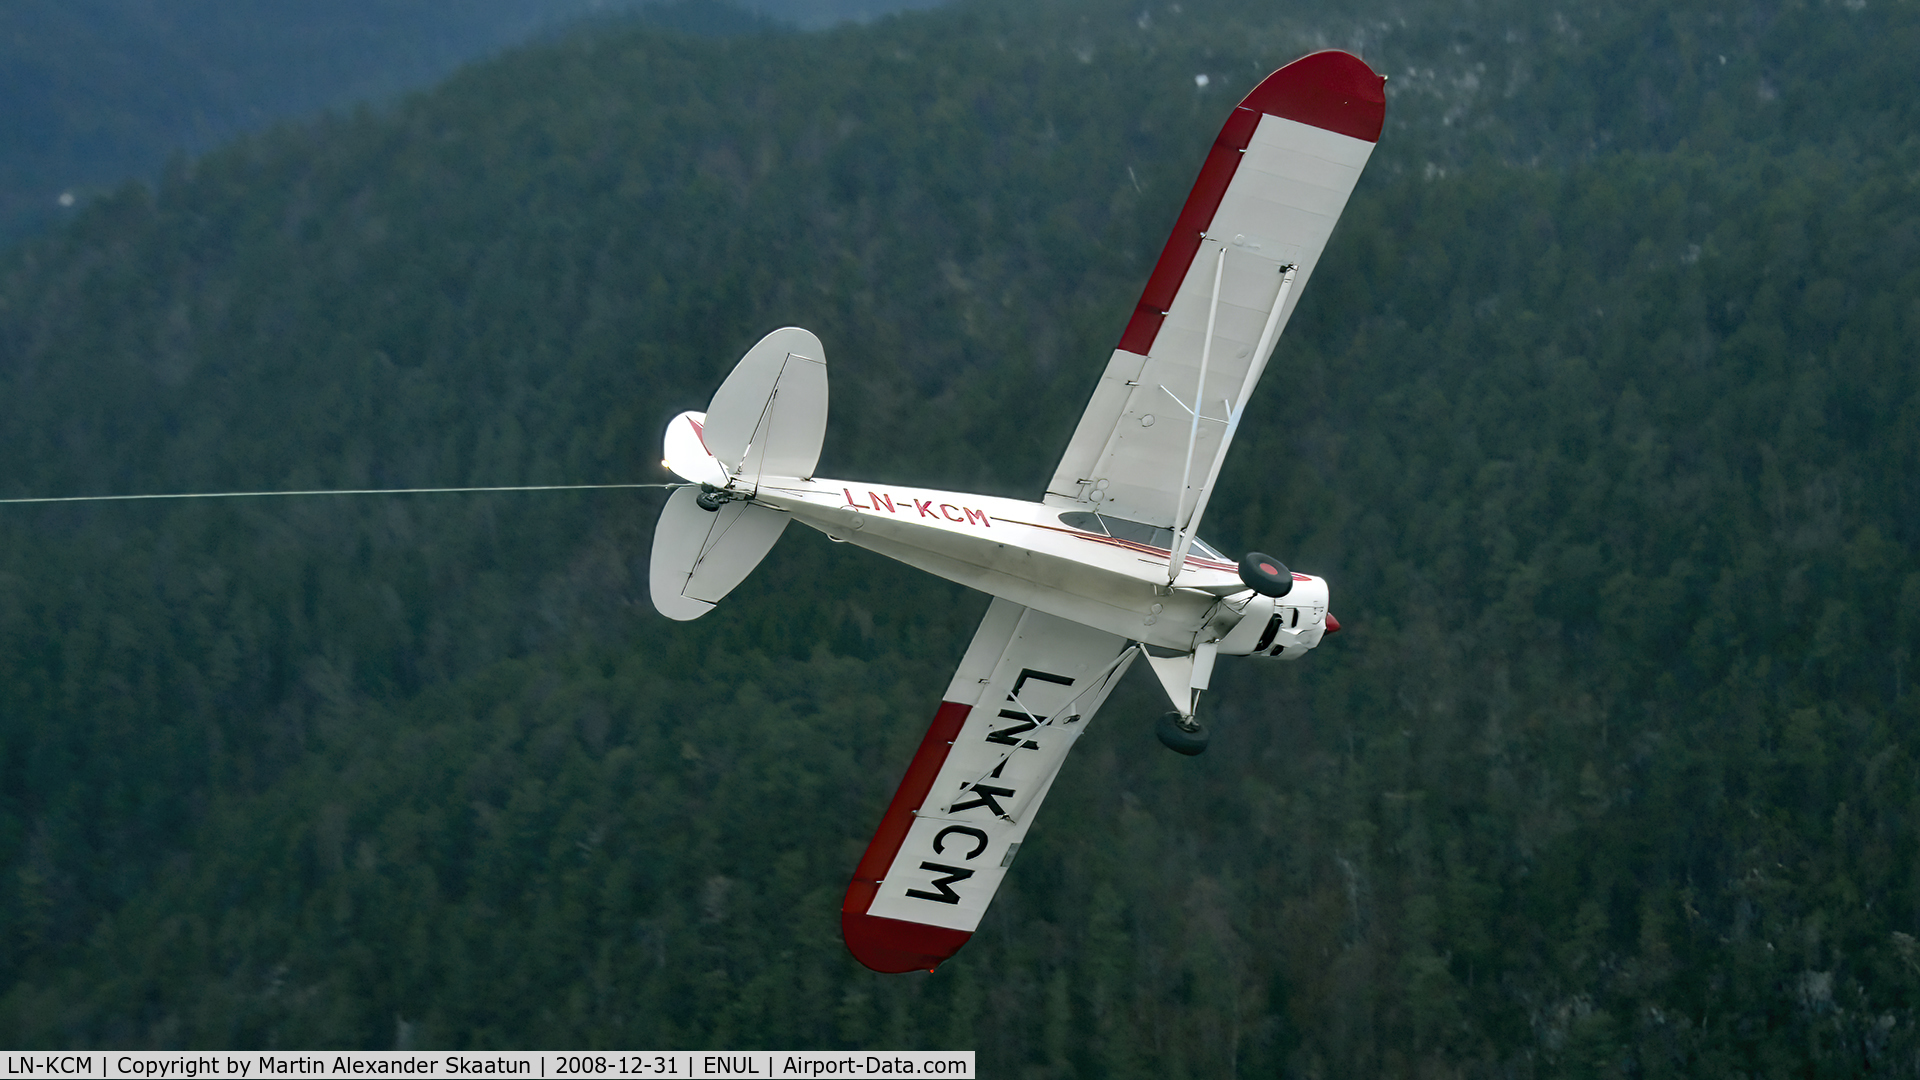 LN-KCM, 1959 Piper PA-18A-150 Super Cub C/N 18-5878, Banking away after releasing a glider.